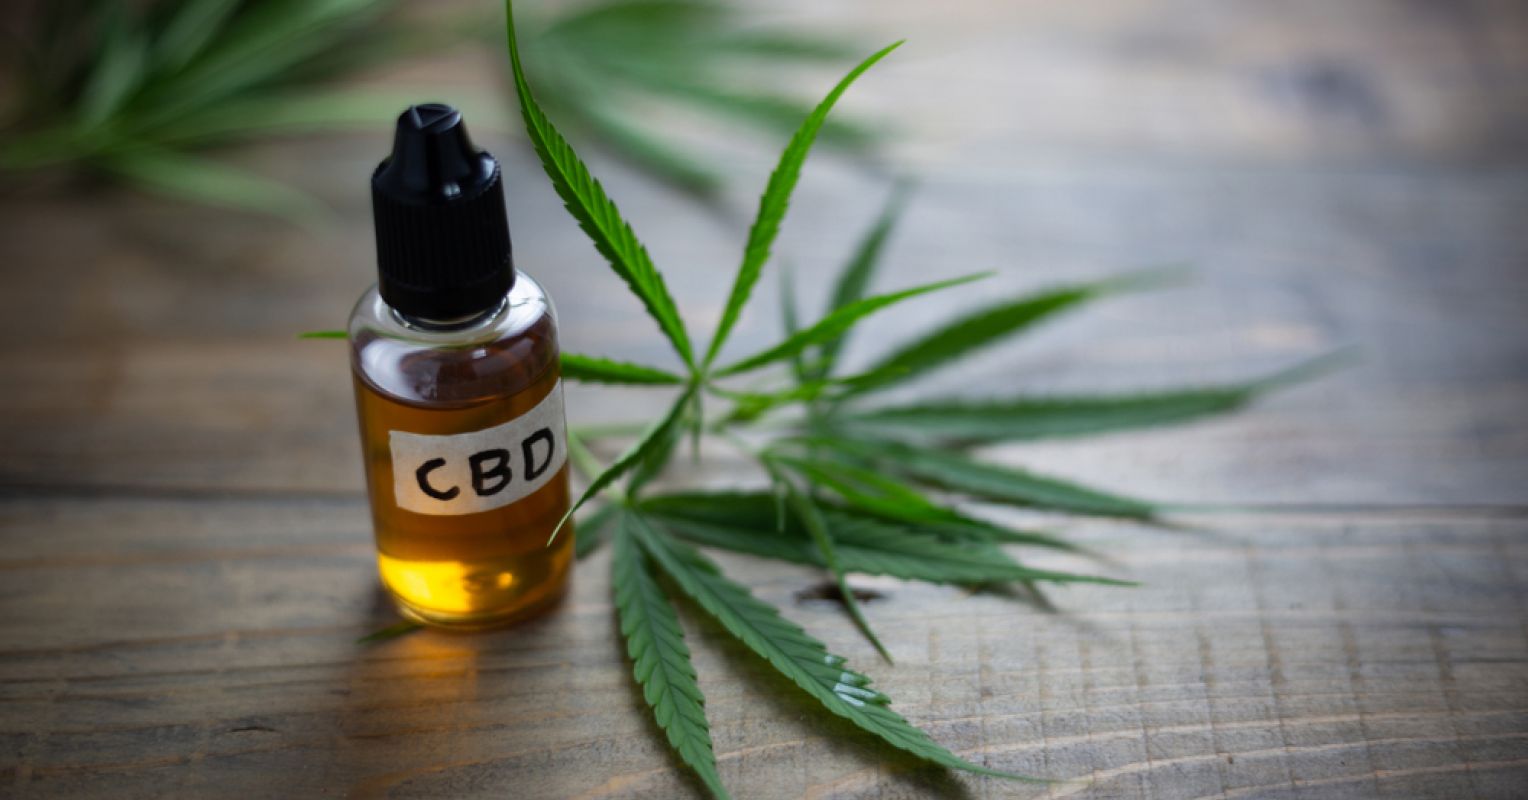 Compassion And Hope: The Beating Heart Of Great CBD Companies